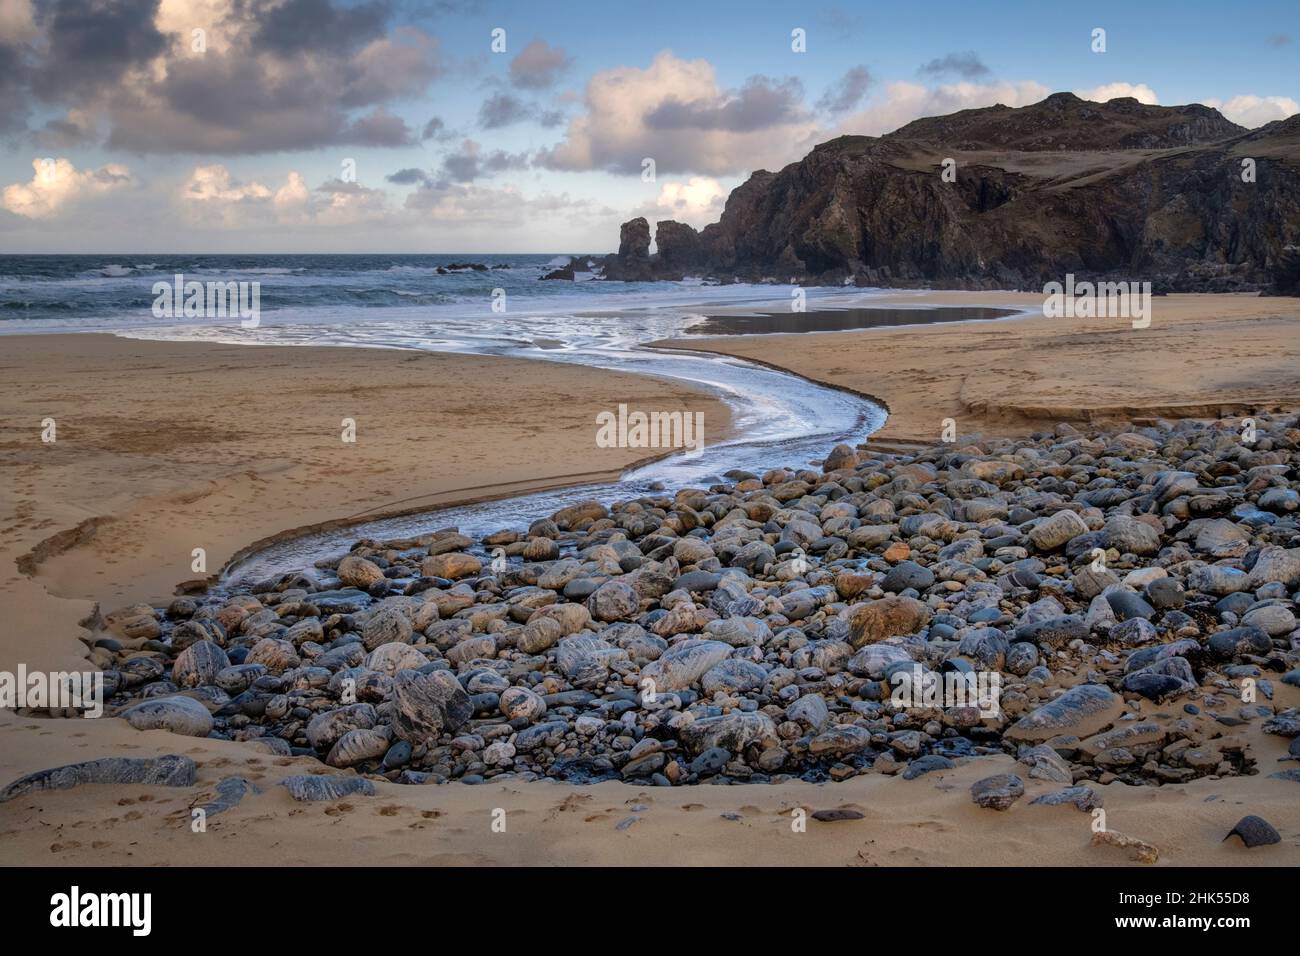 Dalmore Beach (Traigh Dhail Mhor), Isle of Lewis, Outer Hebrides, Scotland, United Kingdom, Europe Stock Photo